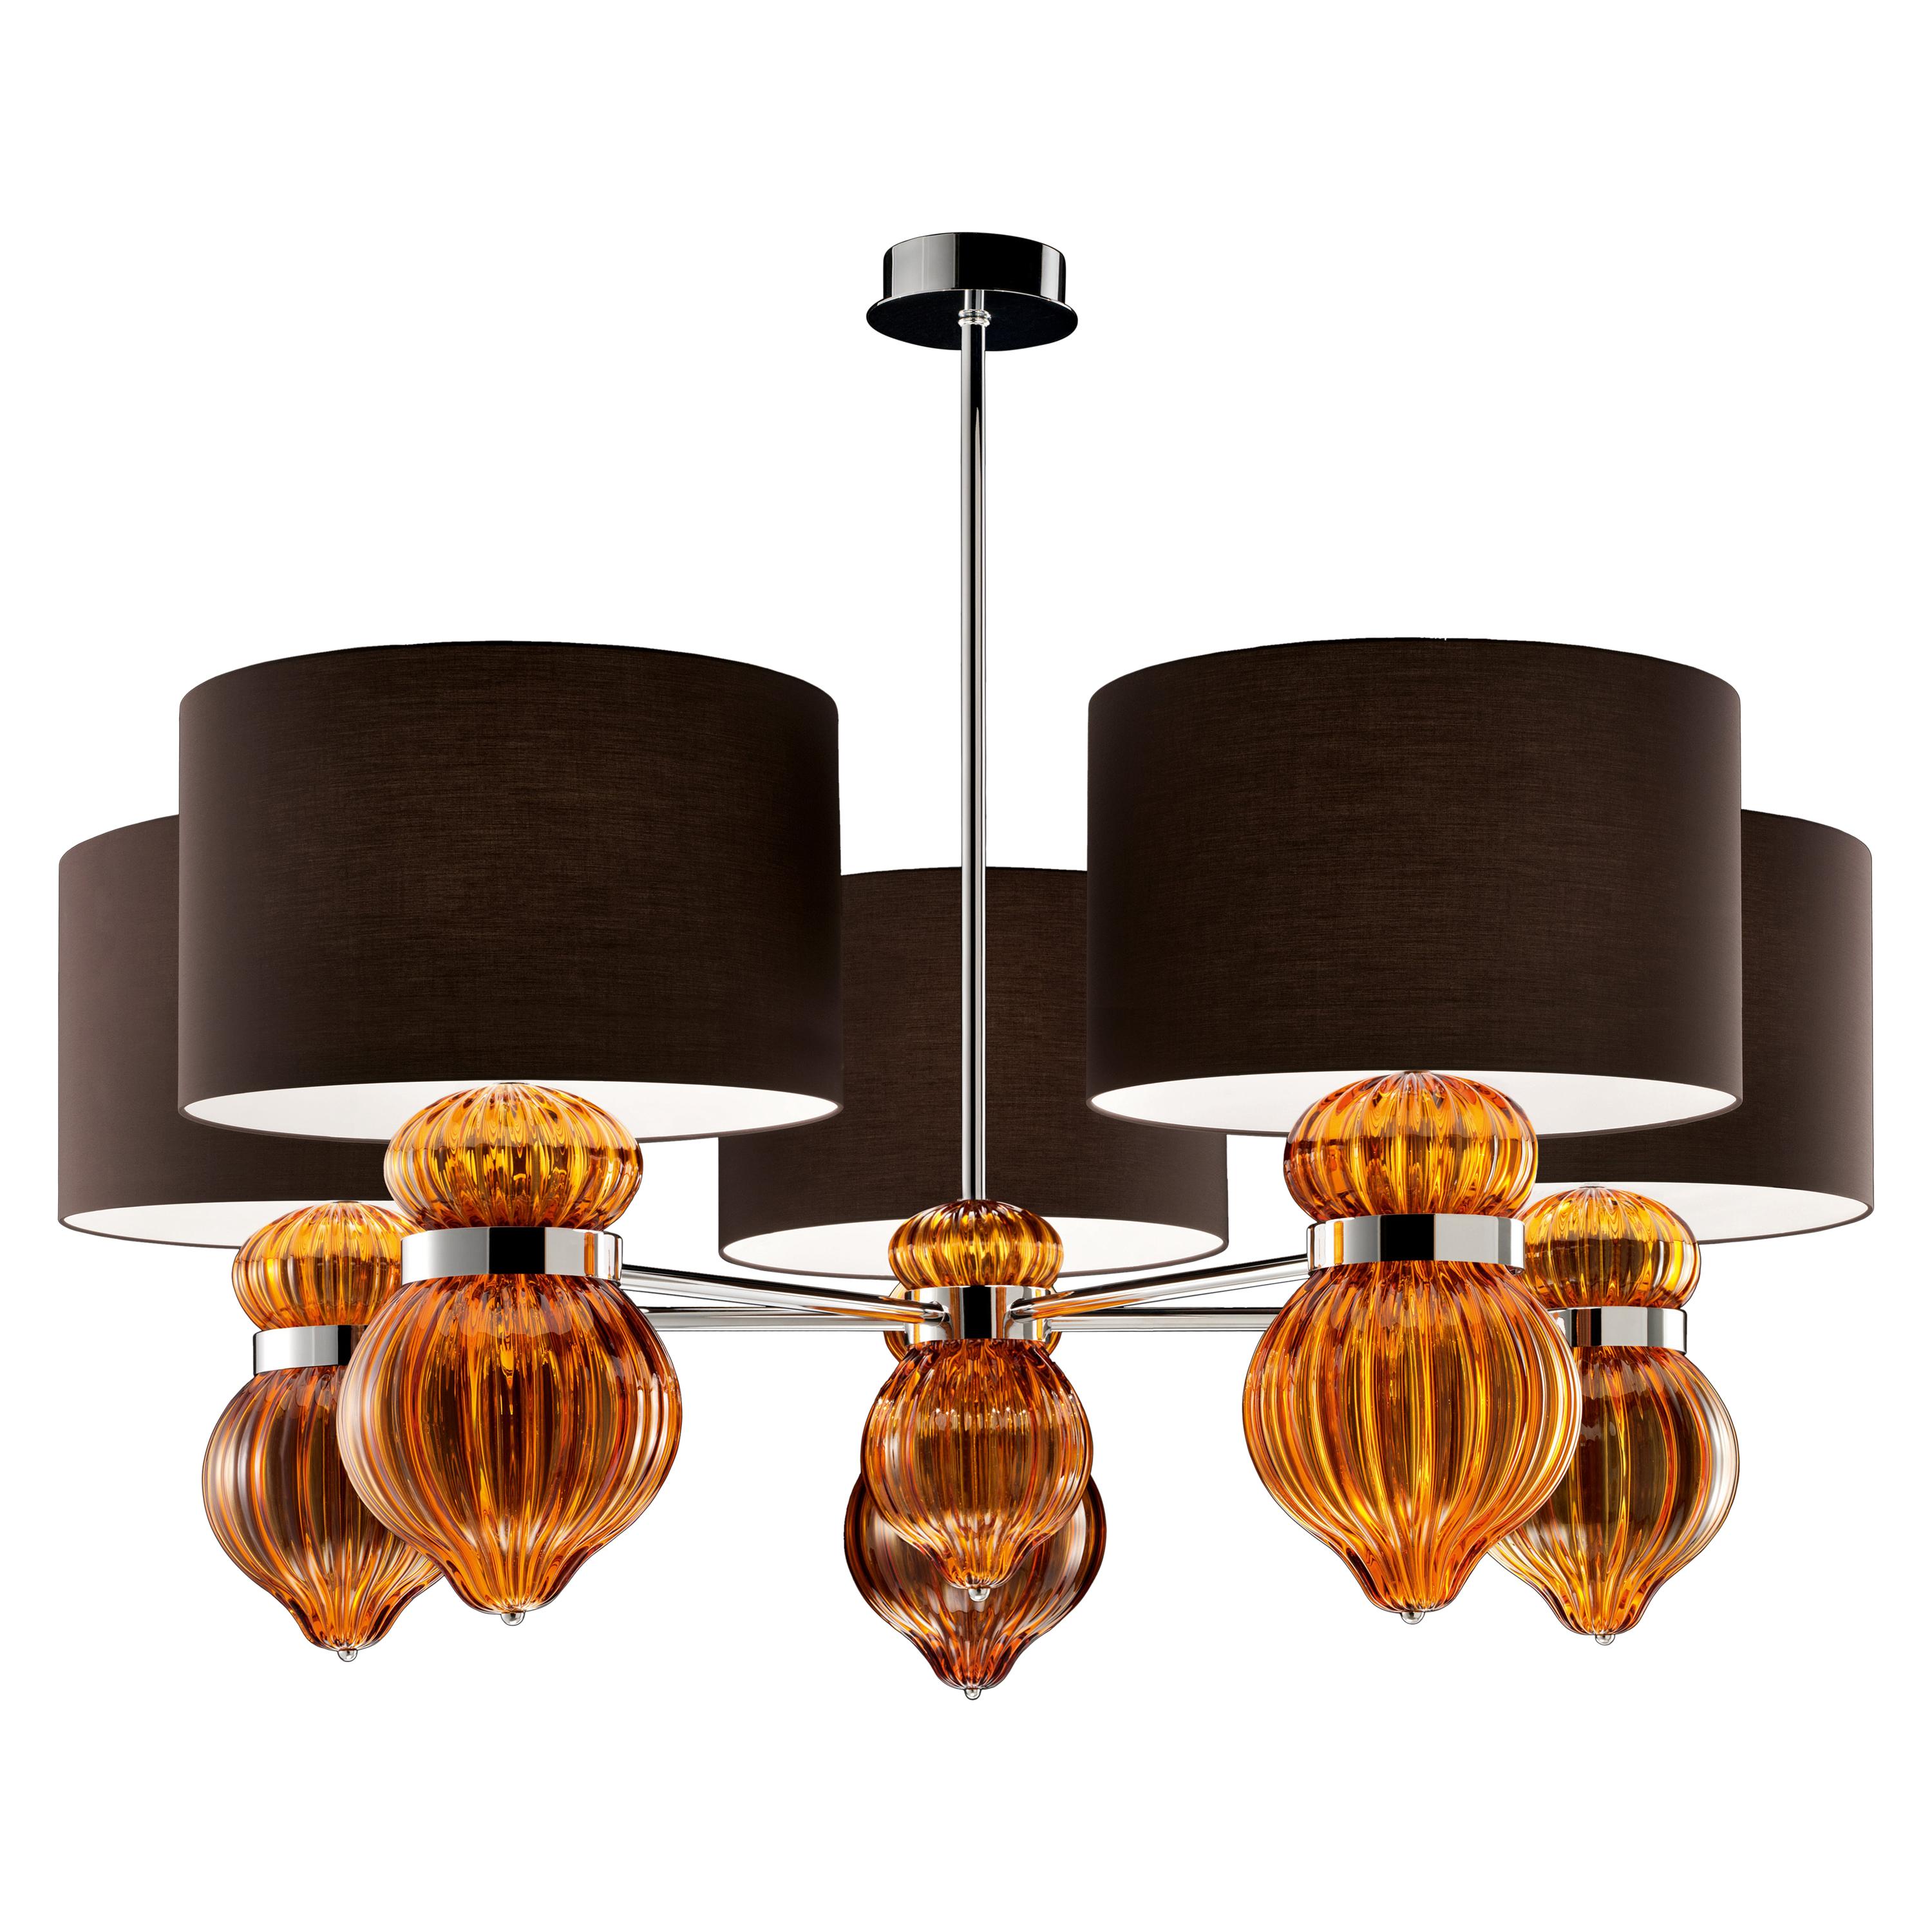 Orange (Caramel_CA) Medina 5684 05 Suspension Lamp in Glass with Brown Shade by, Barovier & Toso